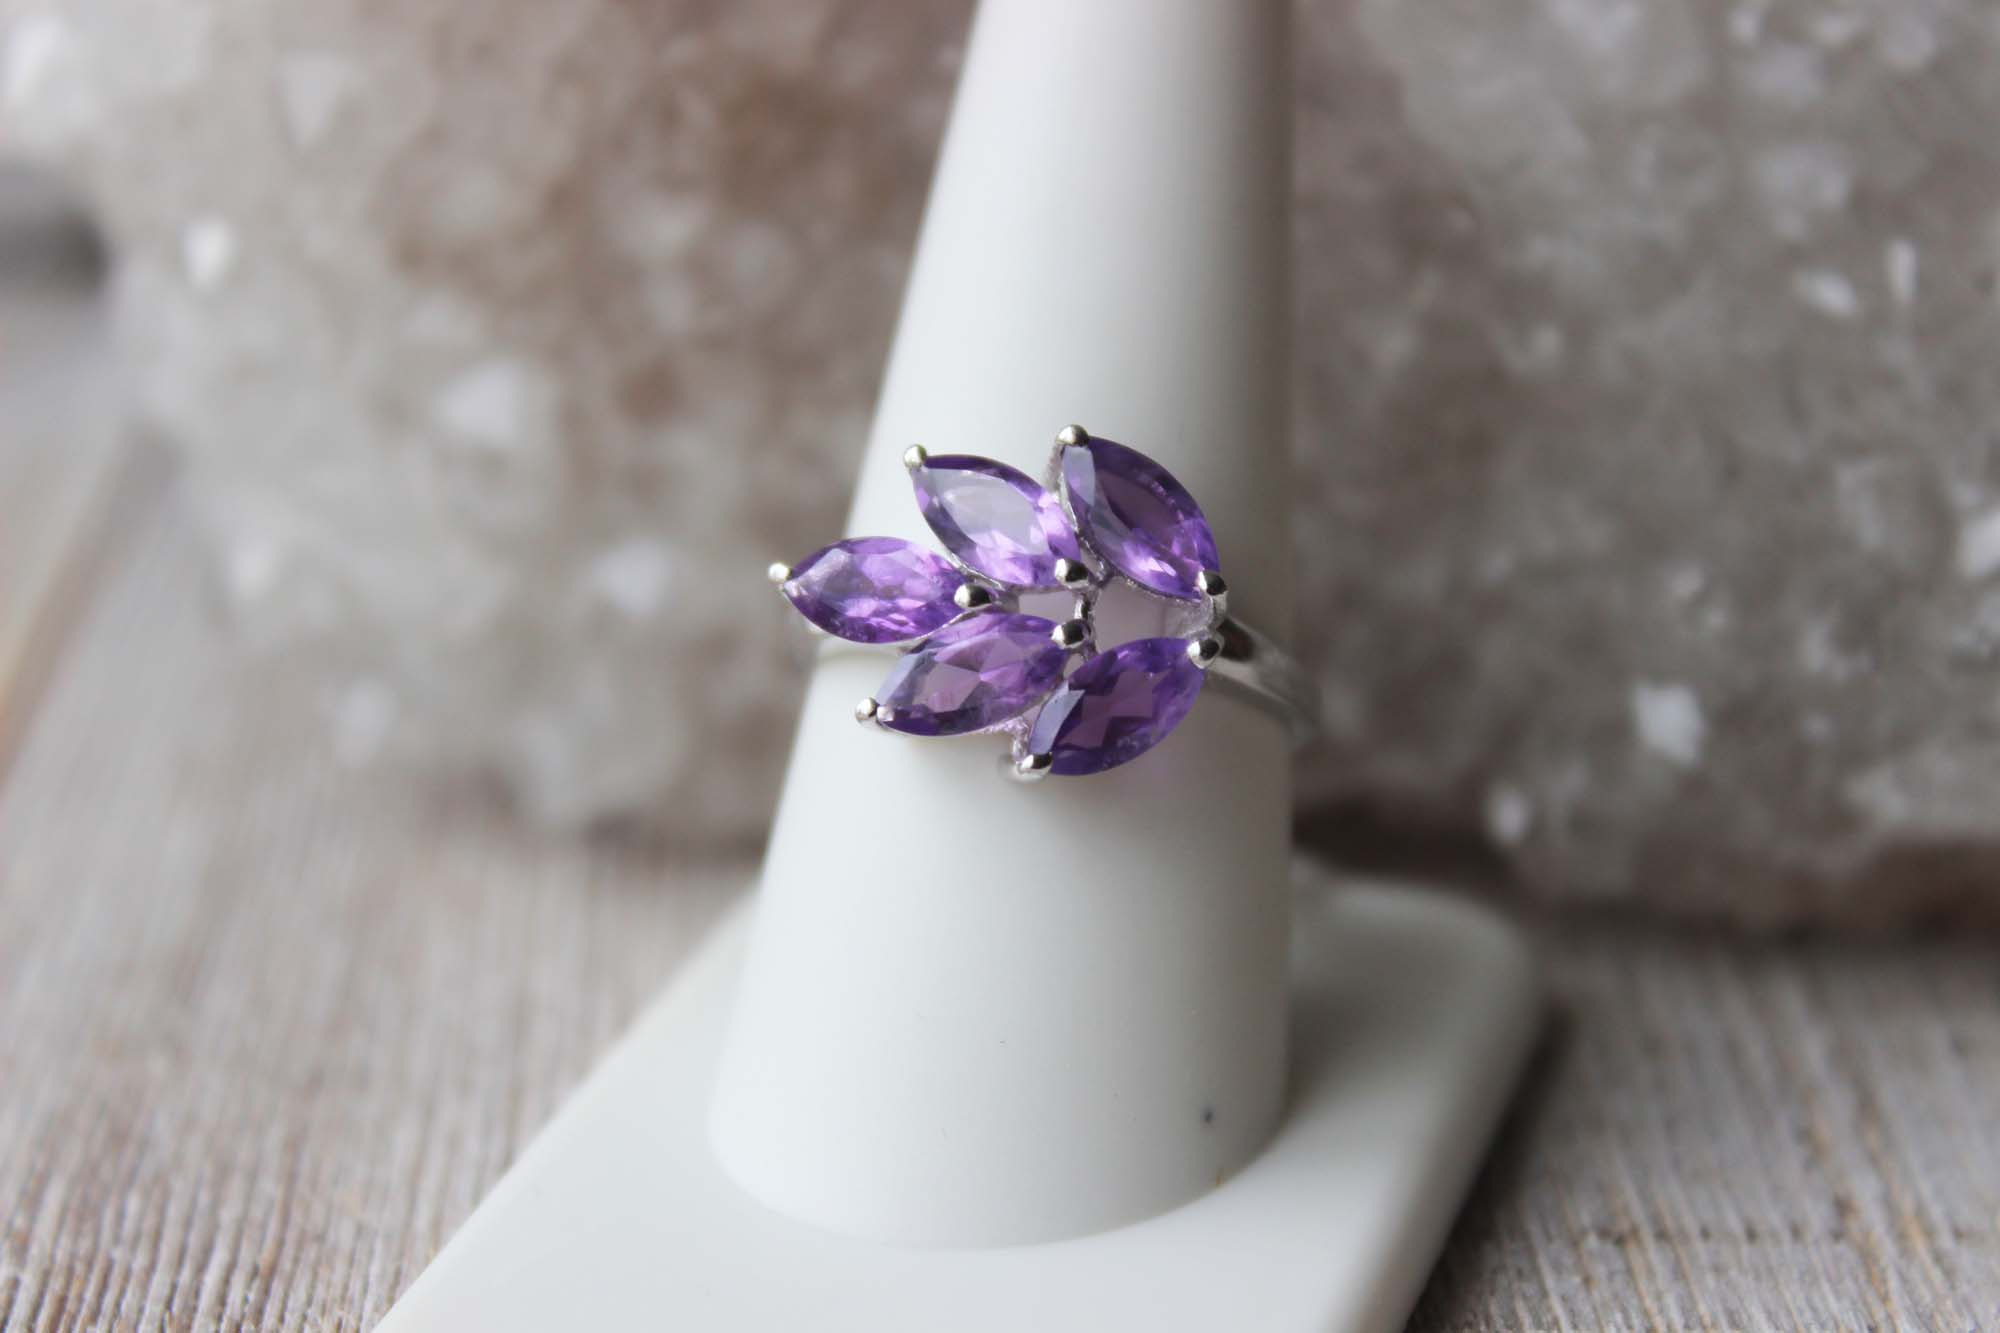 Details about   Amethyst Sterling Silver Lace Ring Sizes 5 to 9 